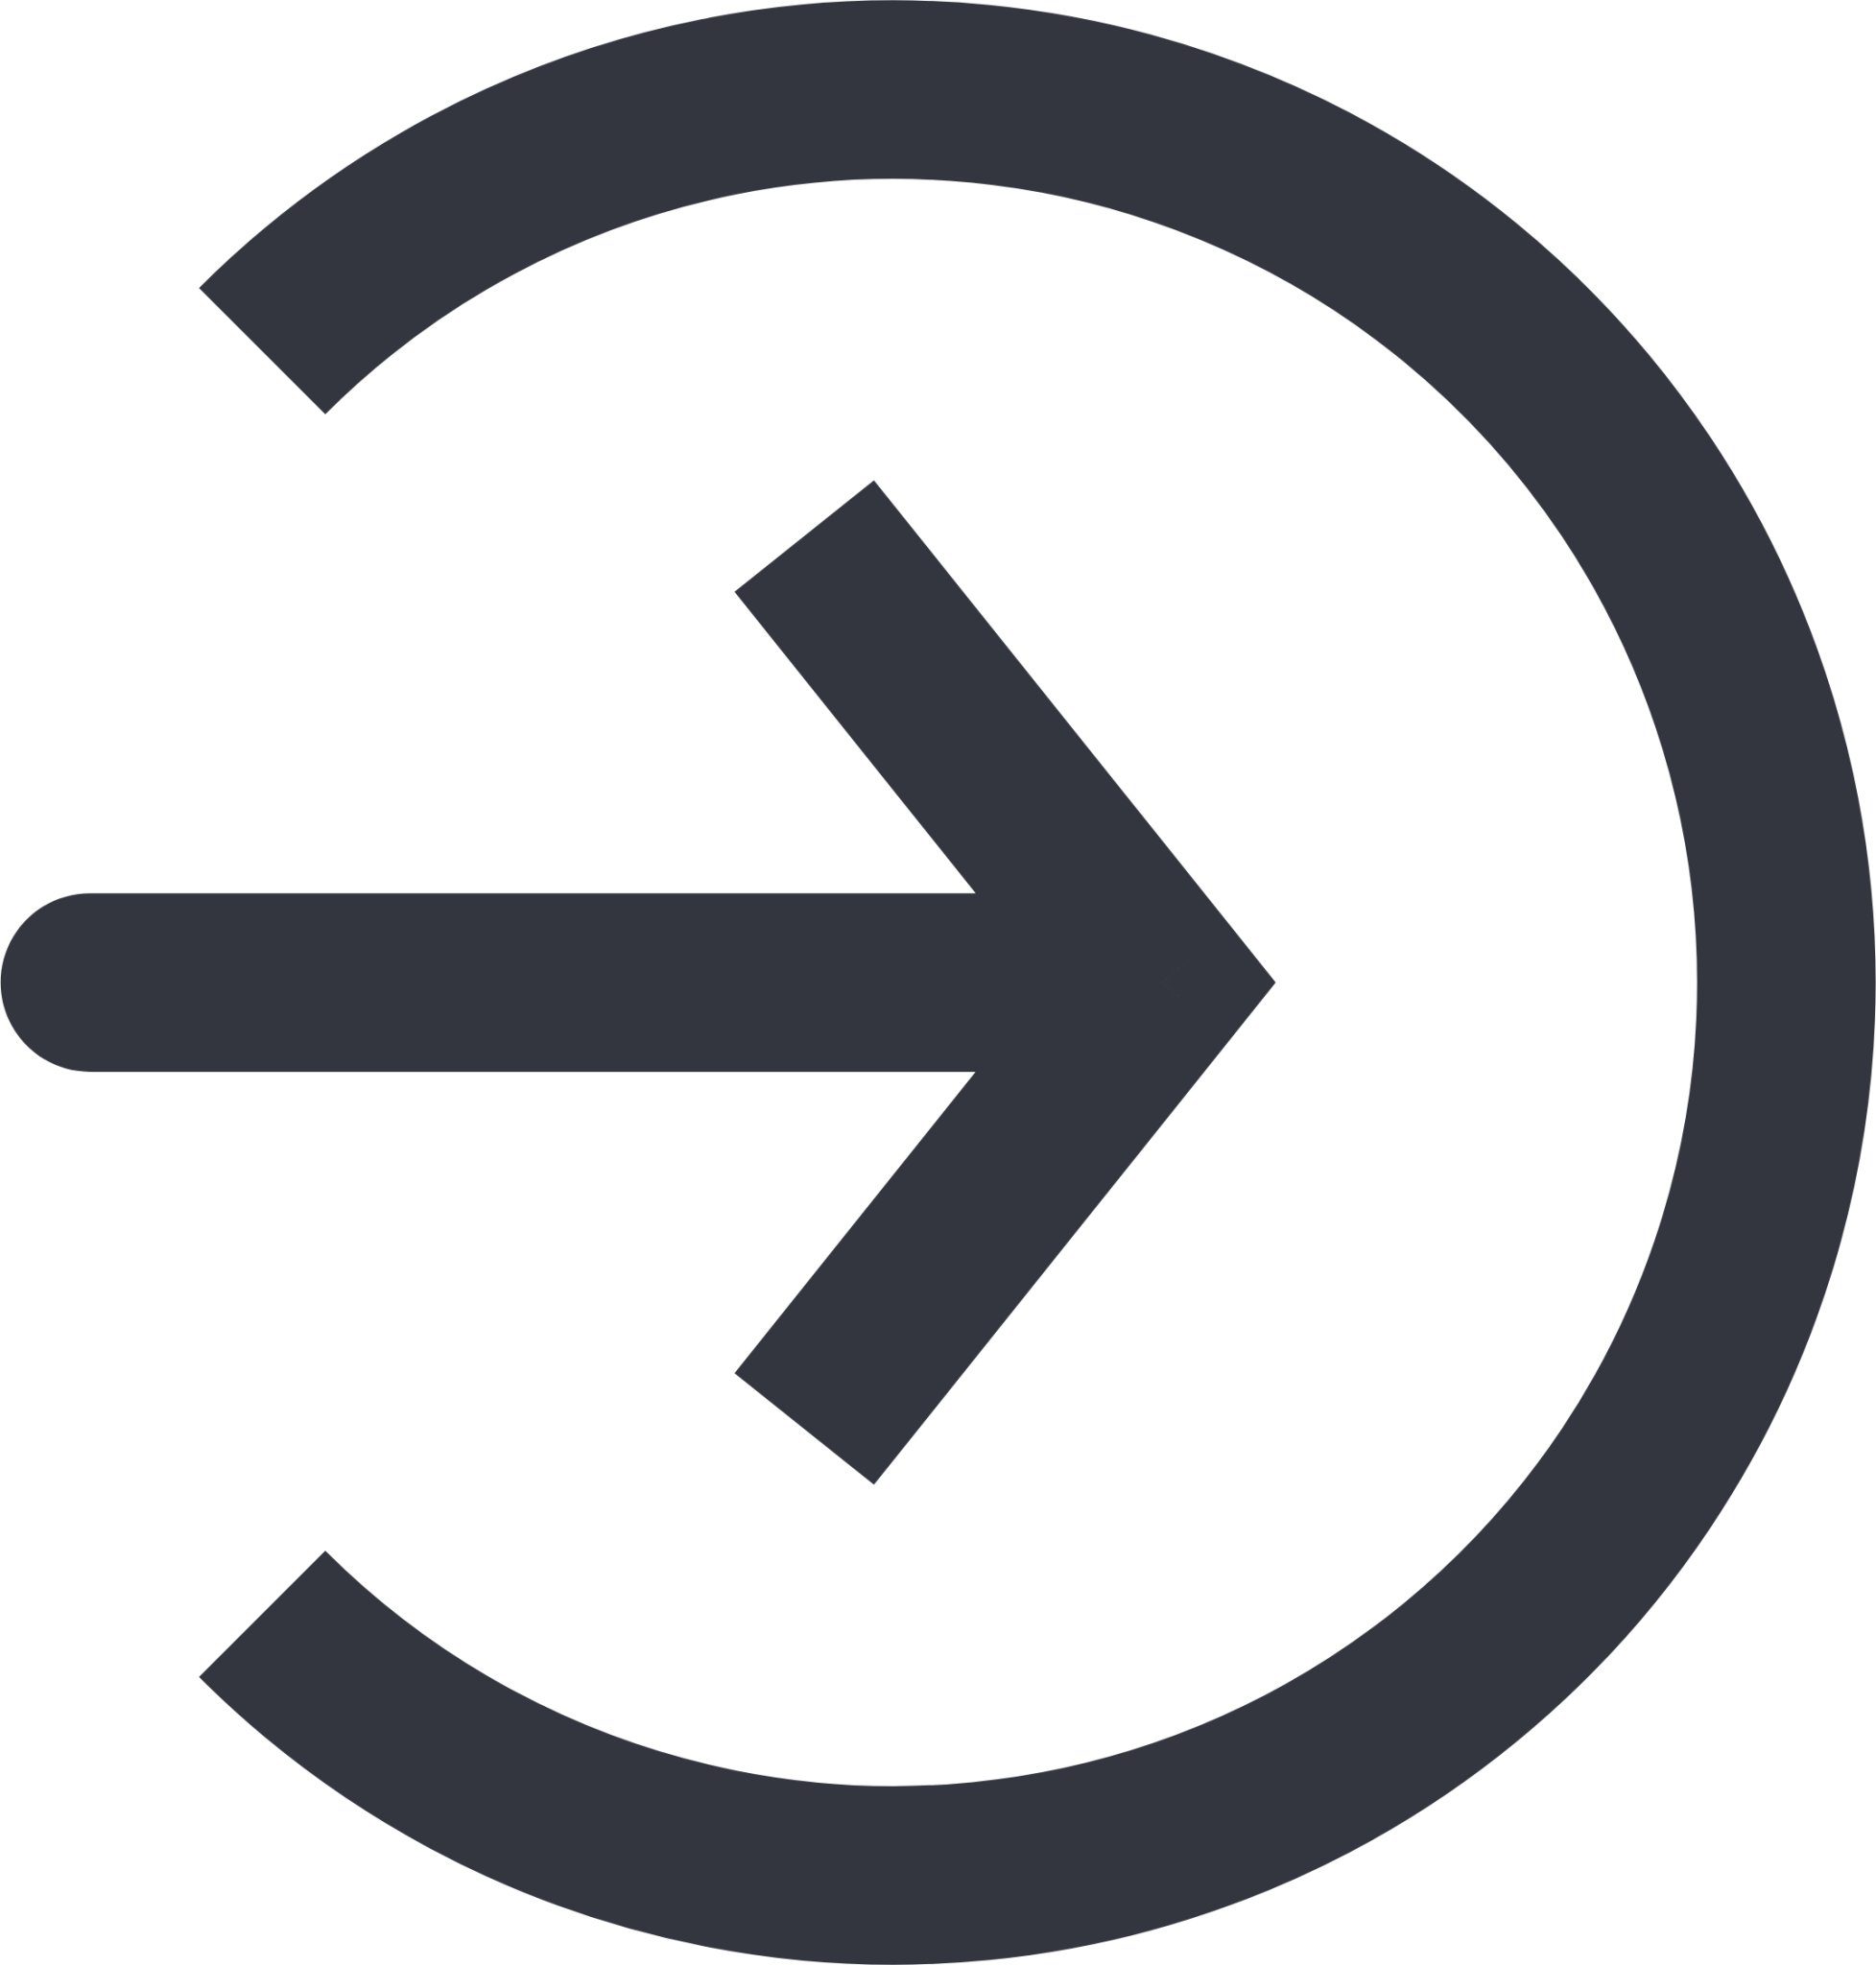 Sign in circle icon